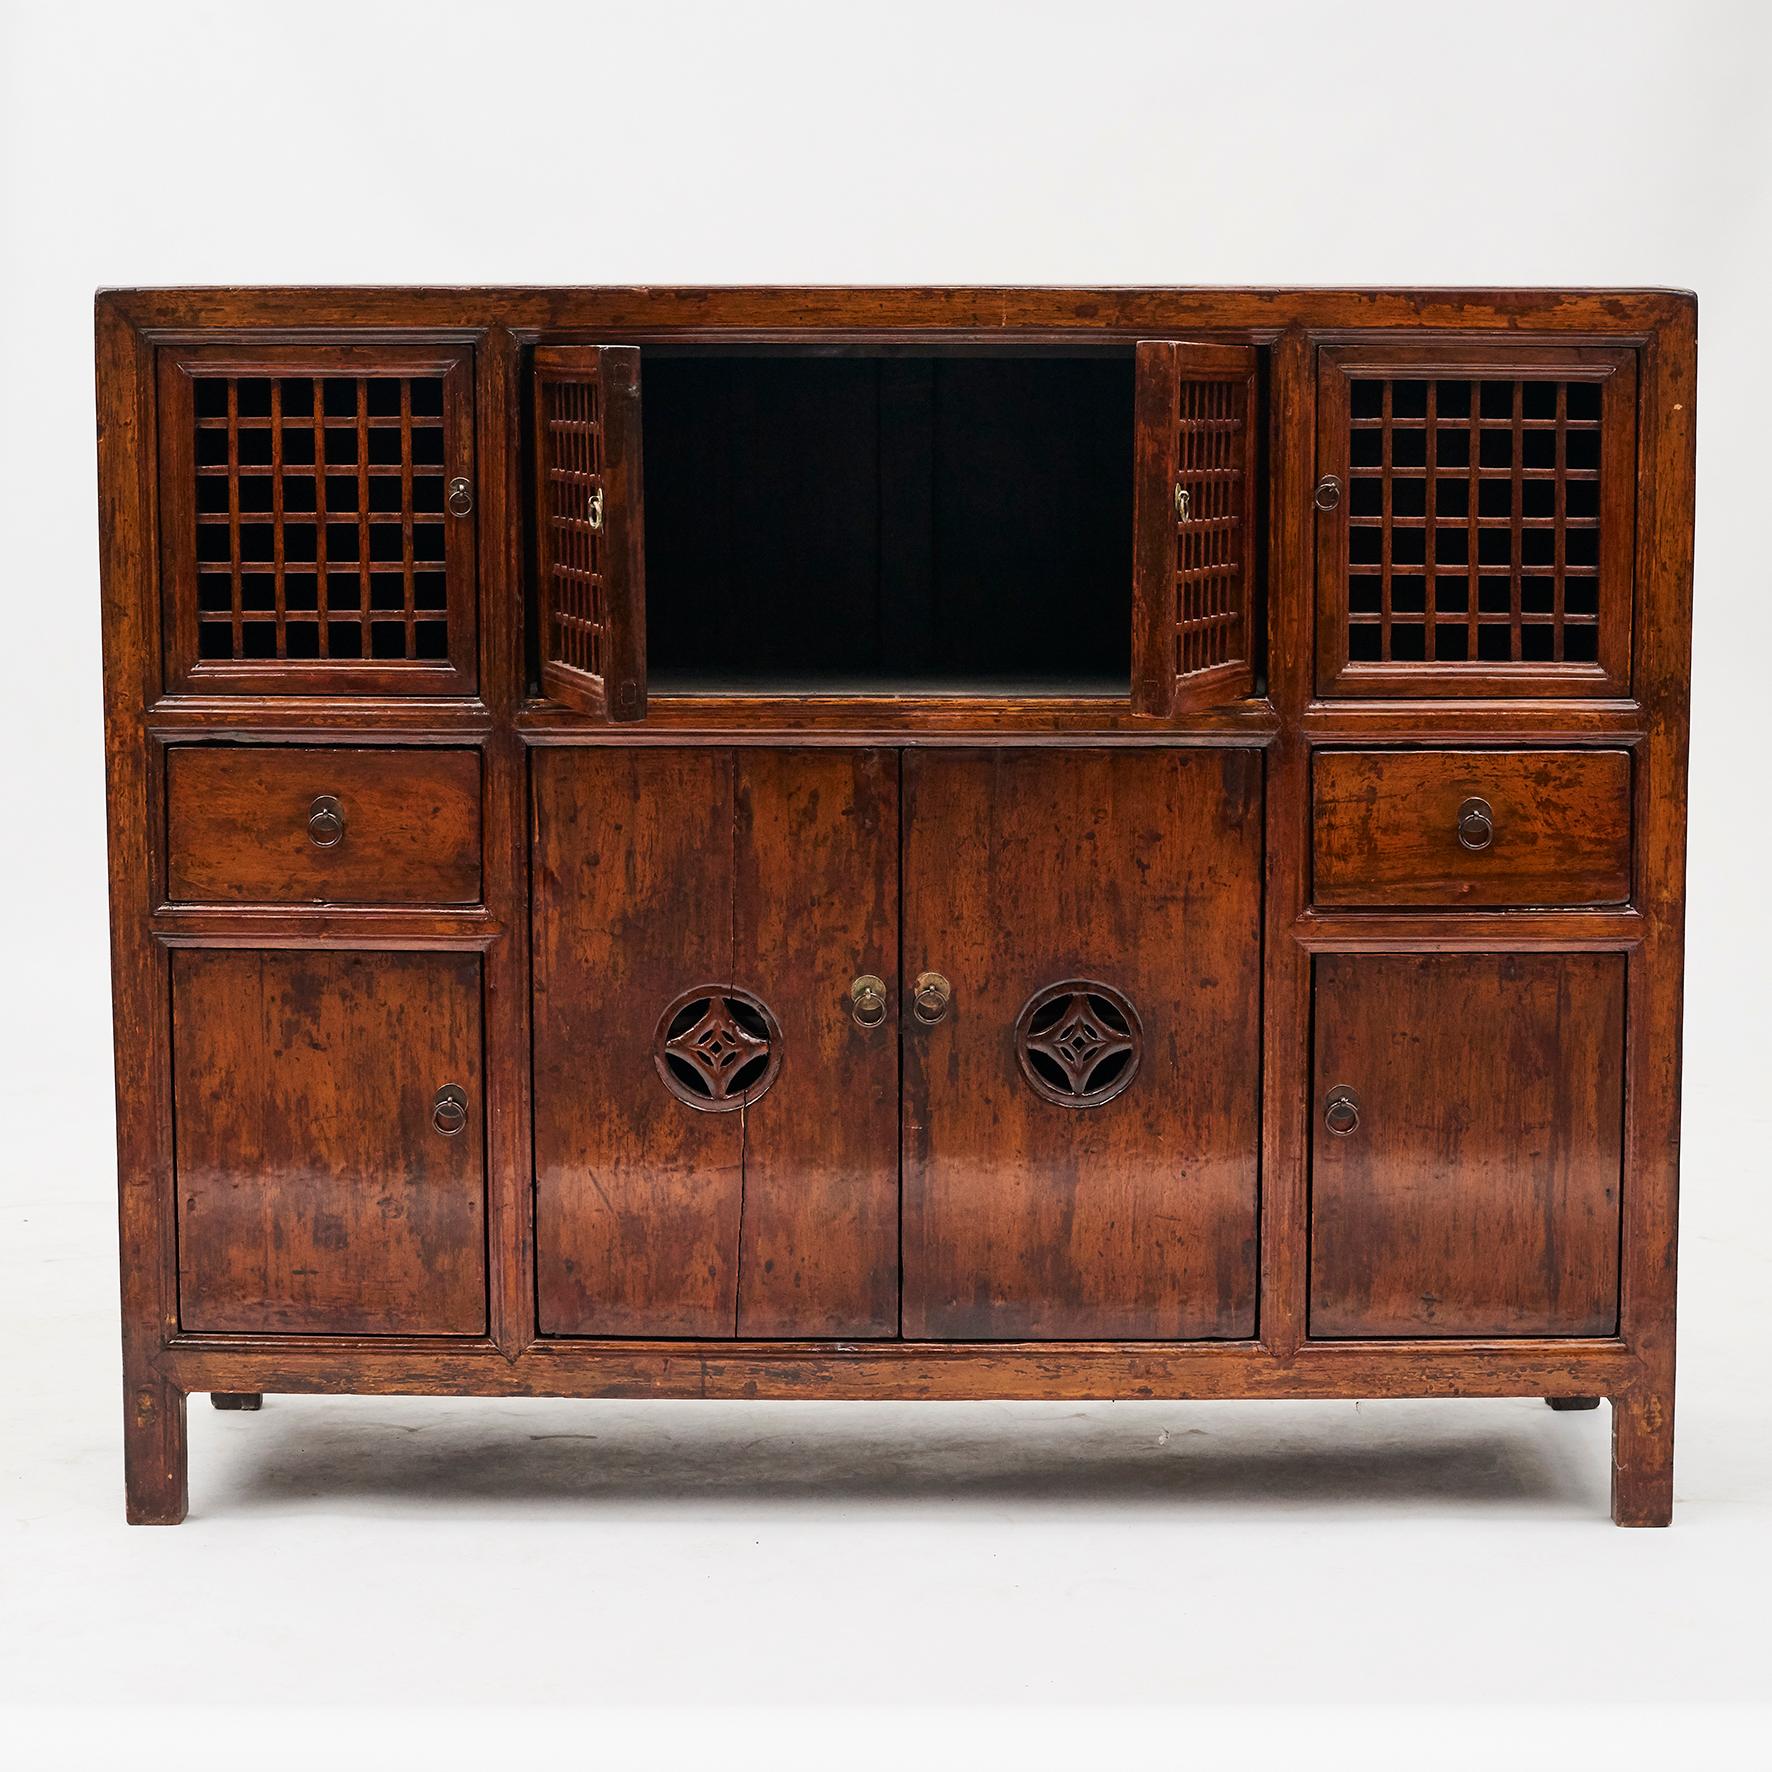 Lattice door cabinet from Shandong, China and dates to the late 1800s.
Original condition and lacquer with natural patina.
This type of cabinets was originally used to provide extra storage in the dining or sleeping areas of a home. China, circa